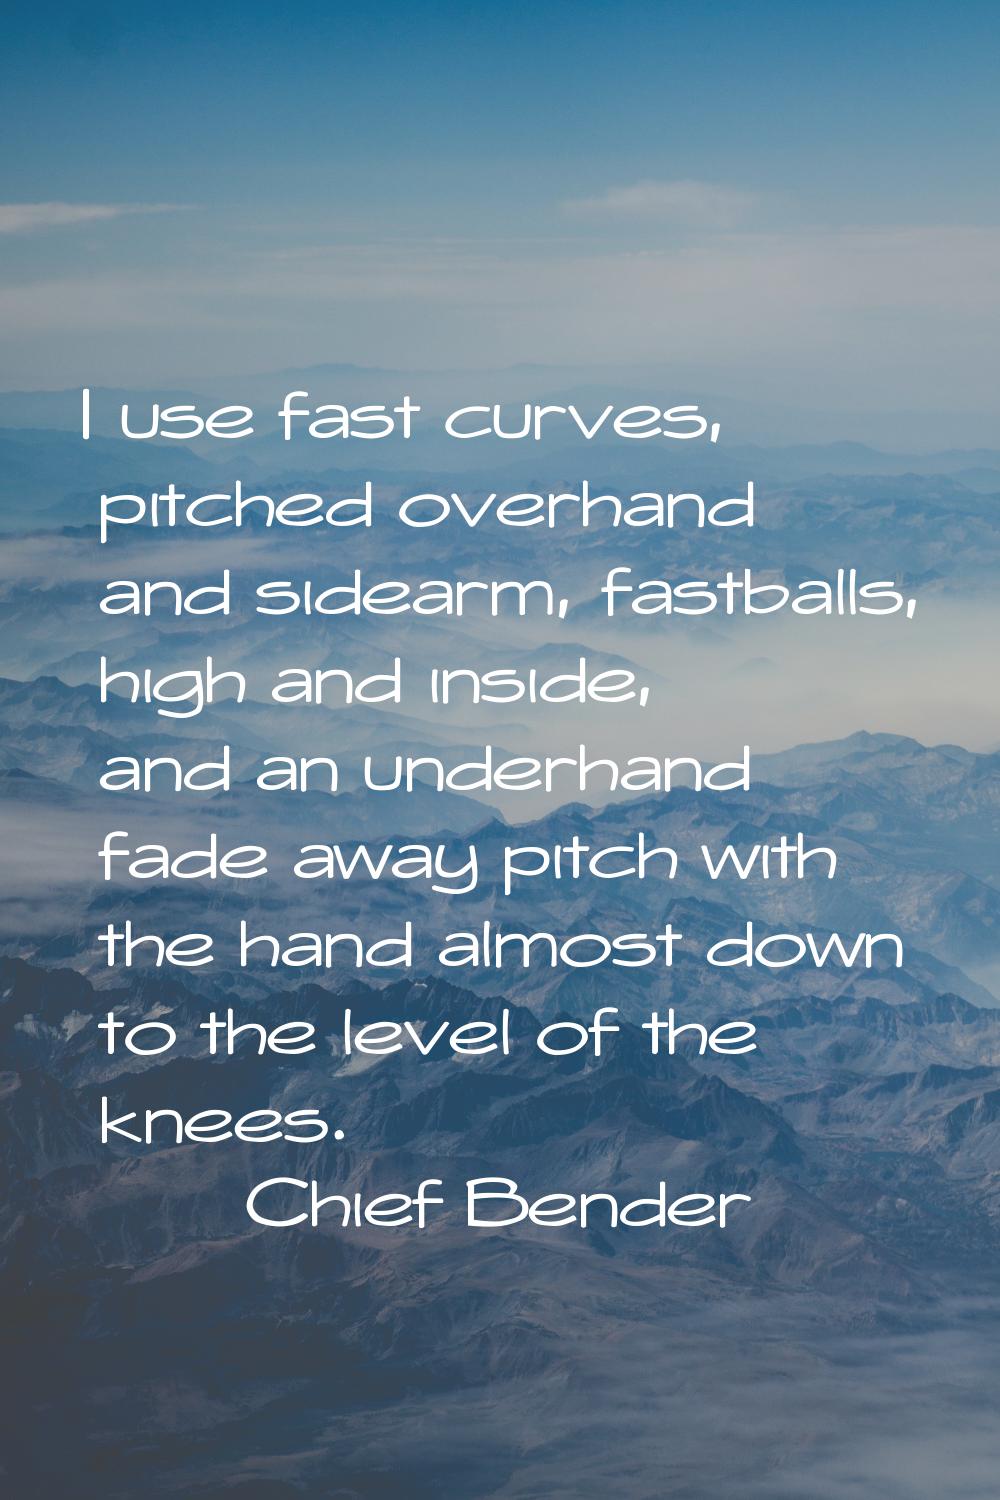 I use fast curves, pitched overhand and sidearm, fastballs, high and inside, and an underhand fade 